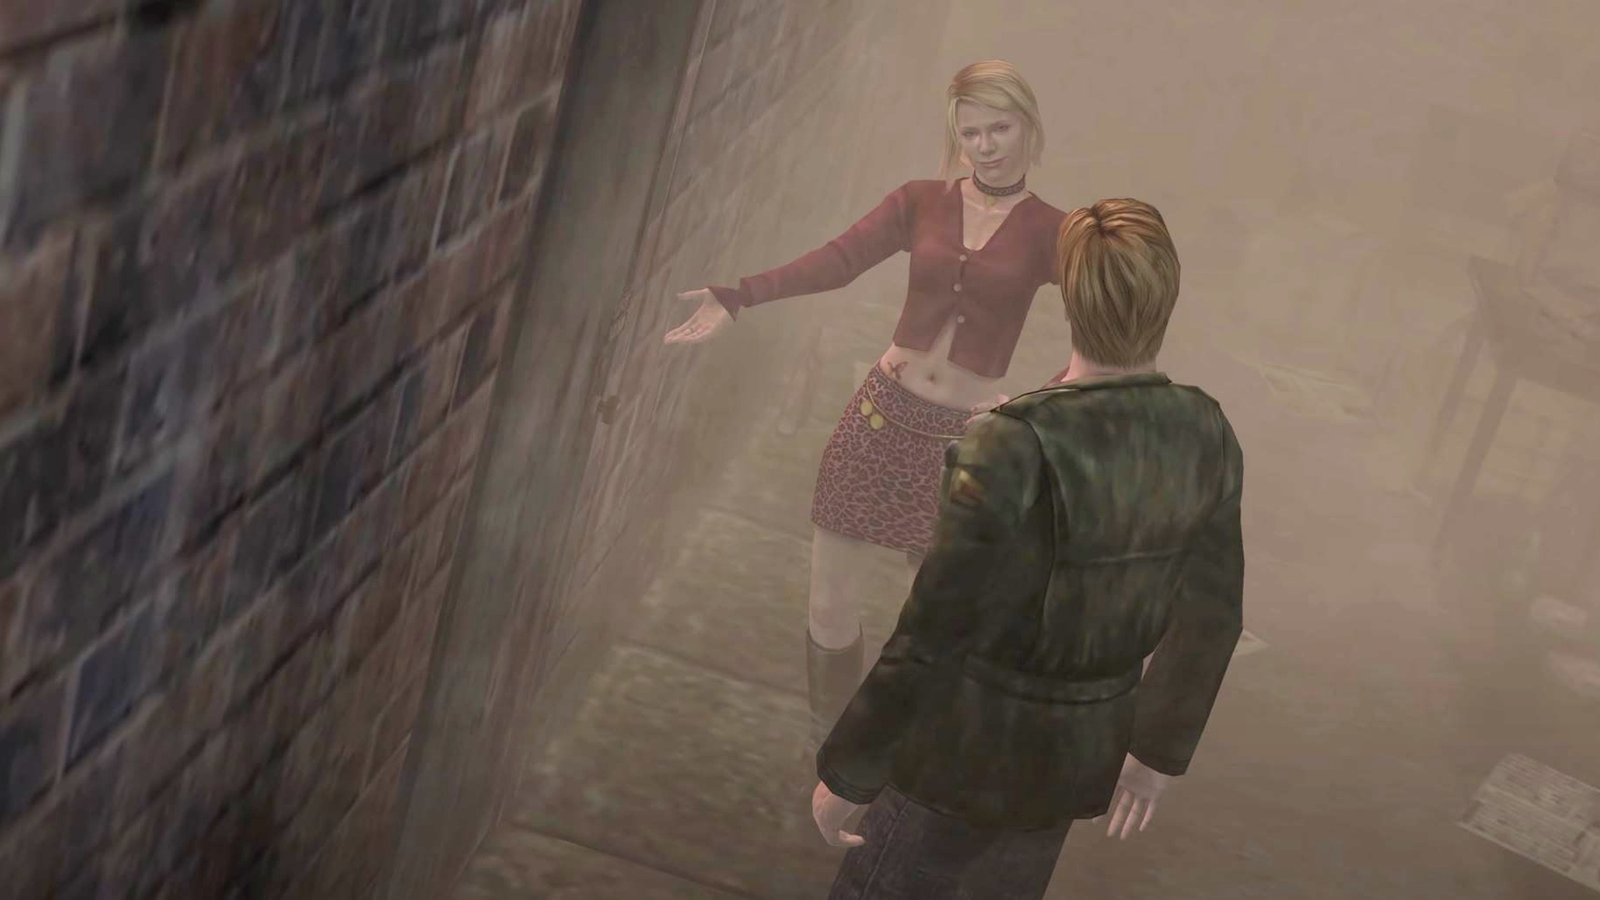 Silent Hill 2 Remake has been quietly updated on Steam